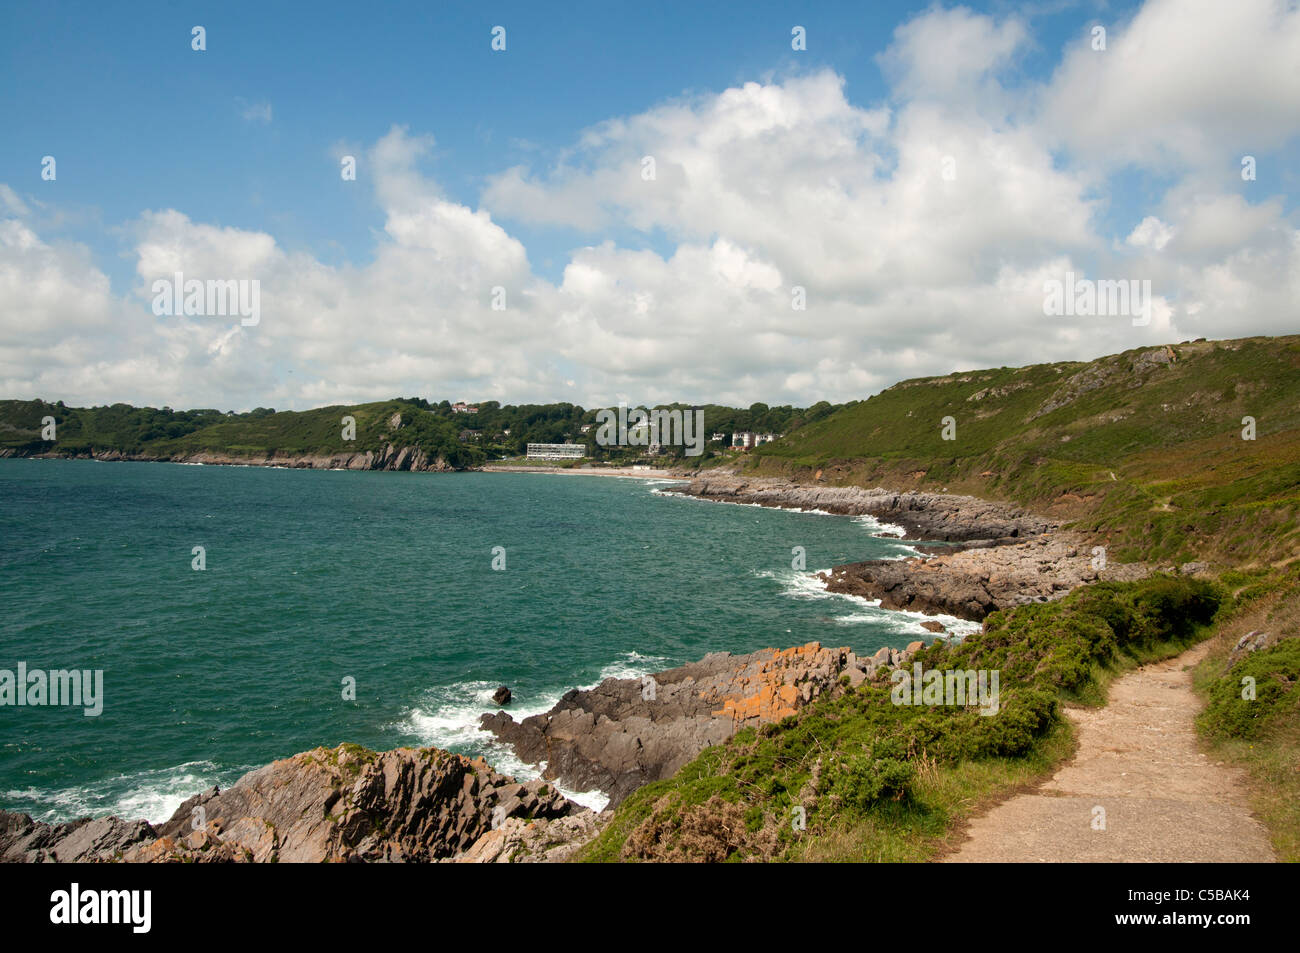 Caswell Beach Wales UK Banque D'Images